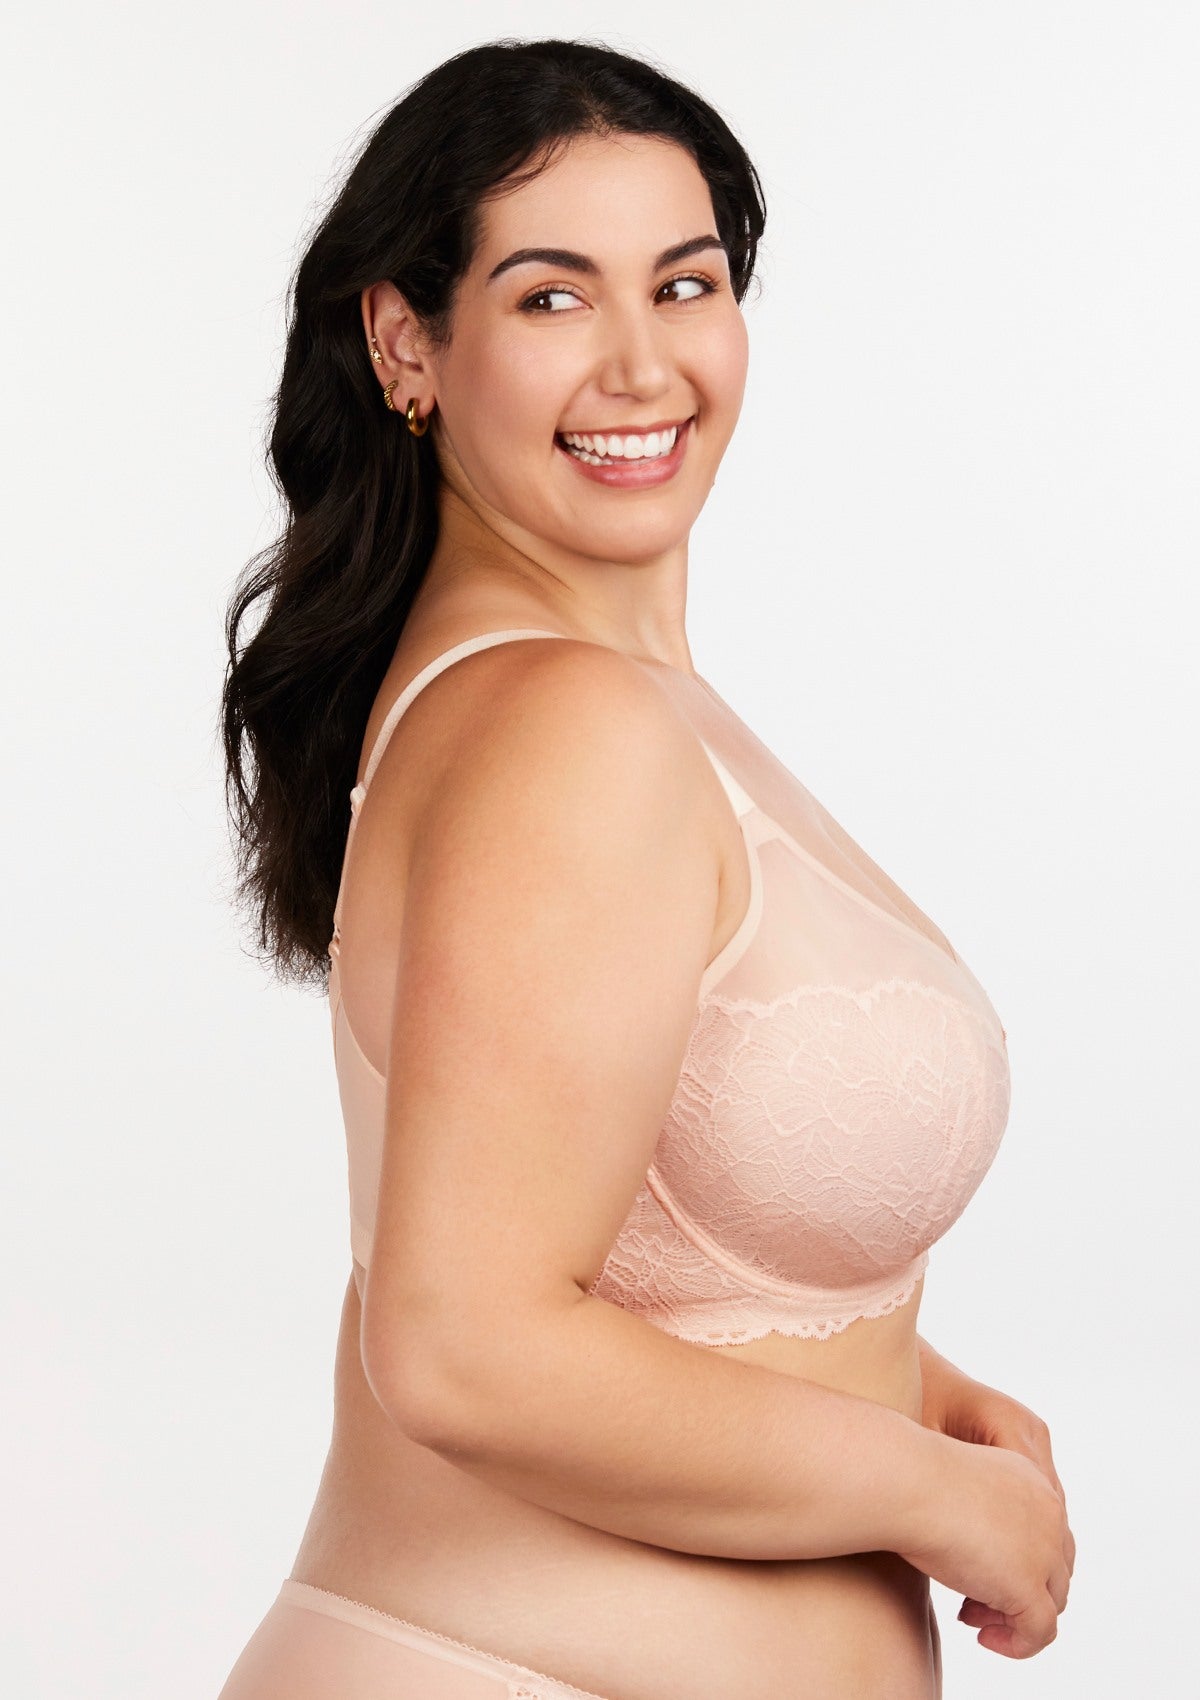 HSIA Blossom Sheer Lace Bra: Comfortable Underwire Bra For Big Busts - Dusty Peach / 44 / G